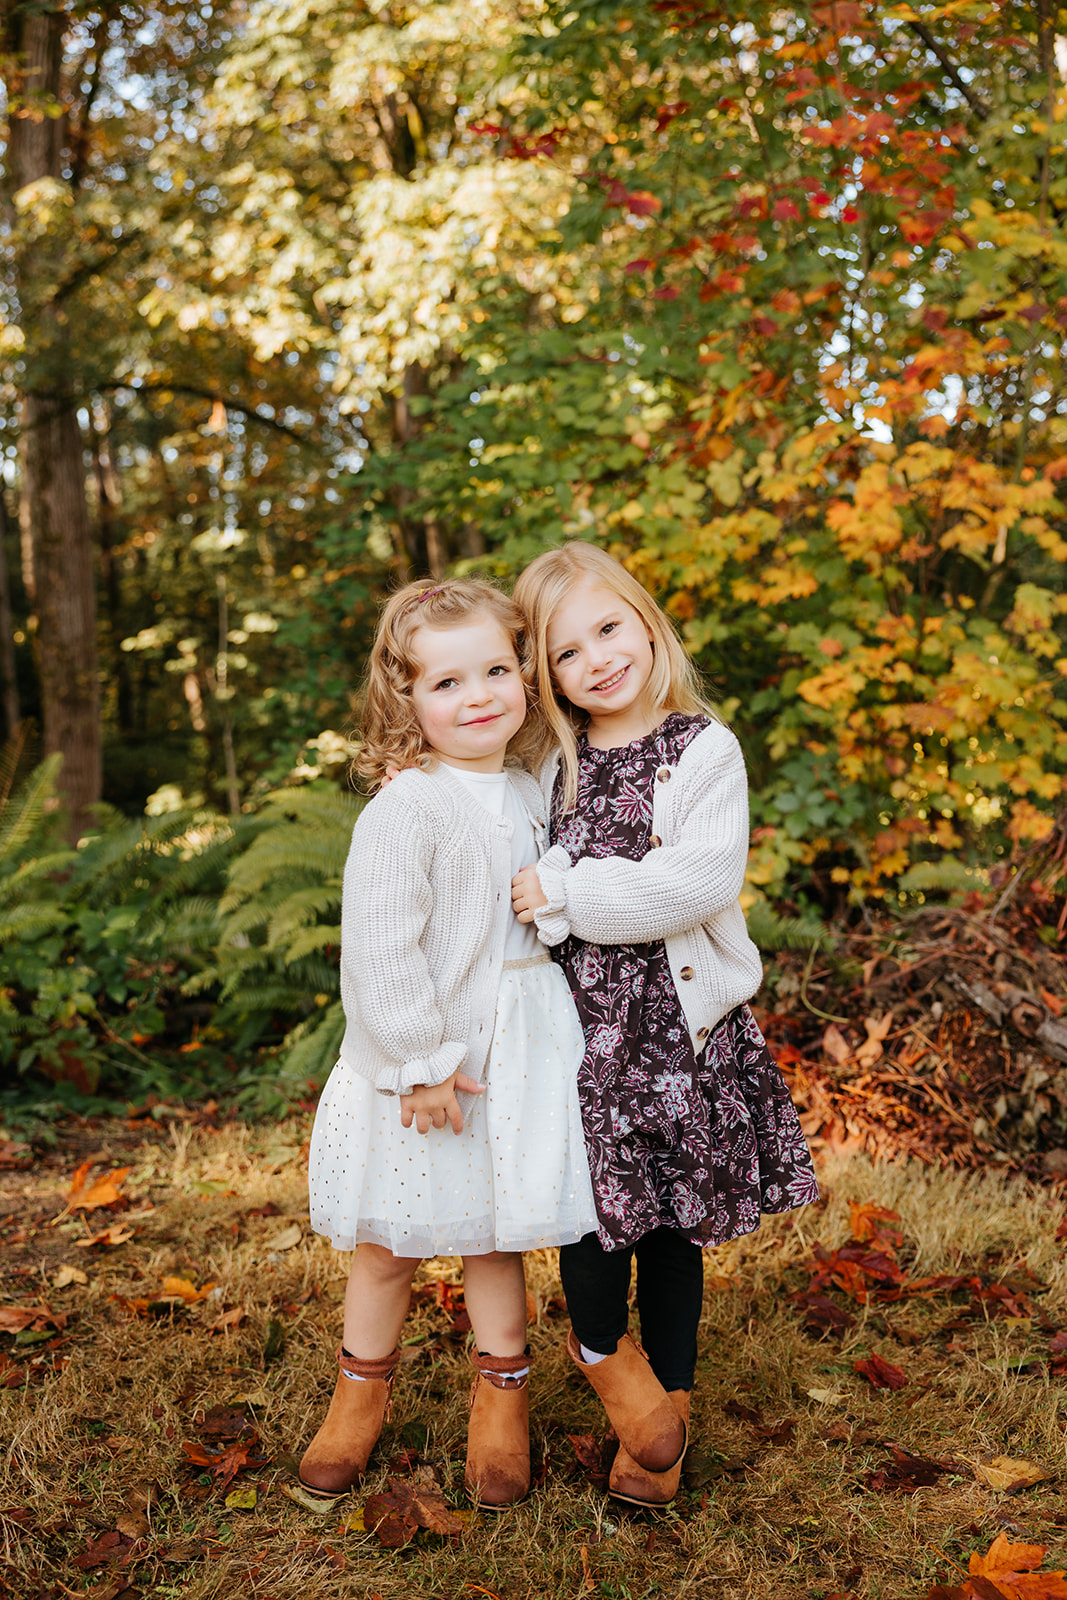 A photo of two young girls hugging each other and smiling at the camera in front of colorful fall foliage.